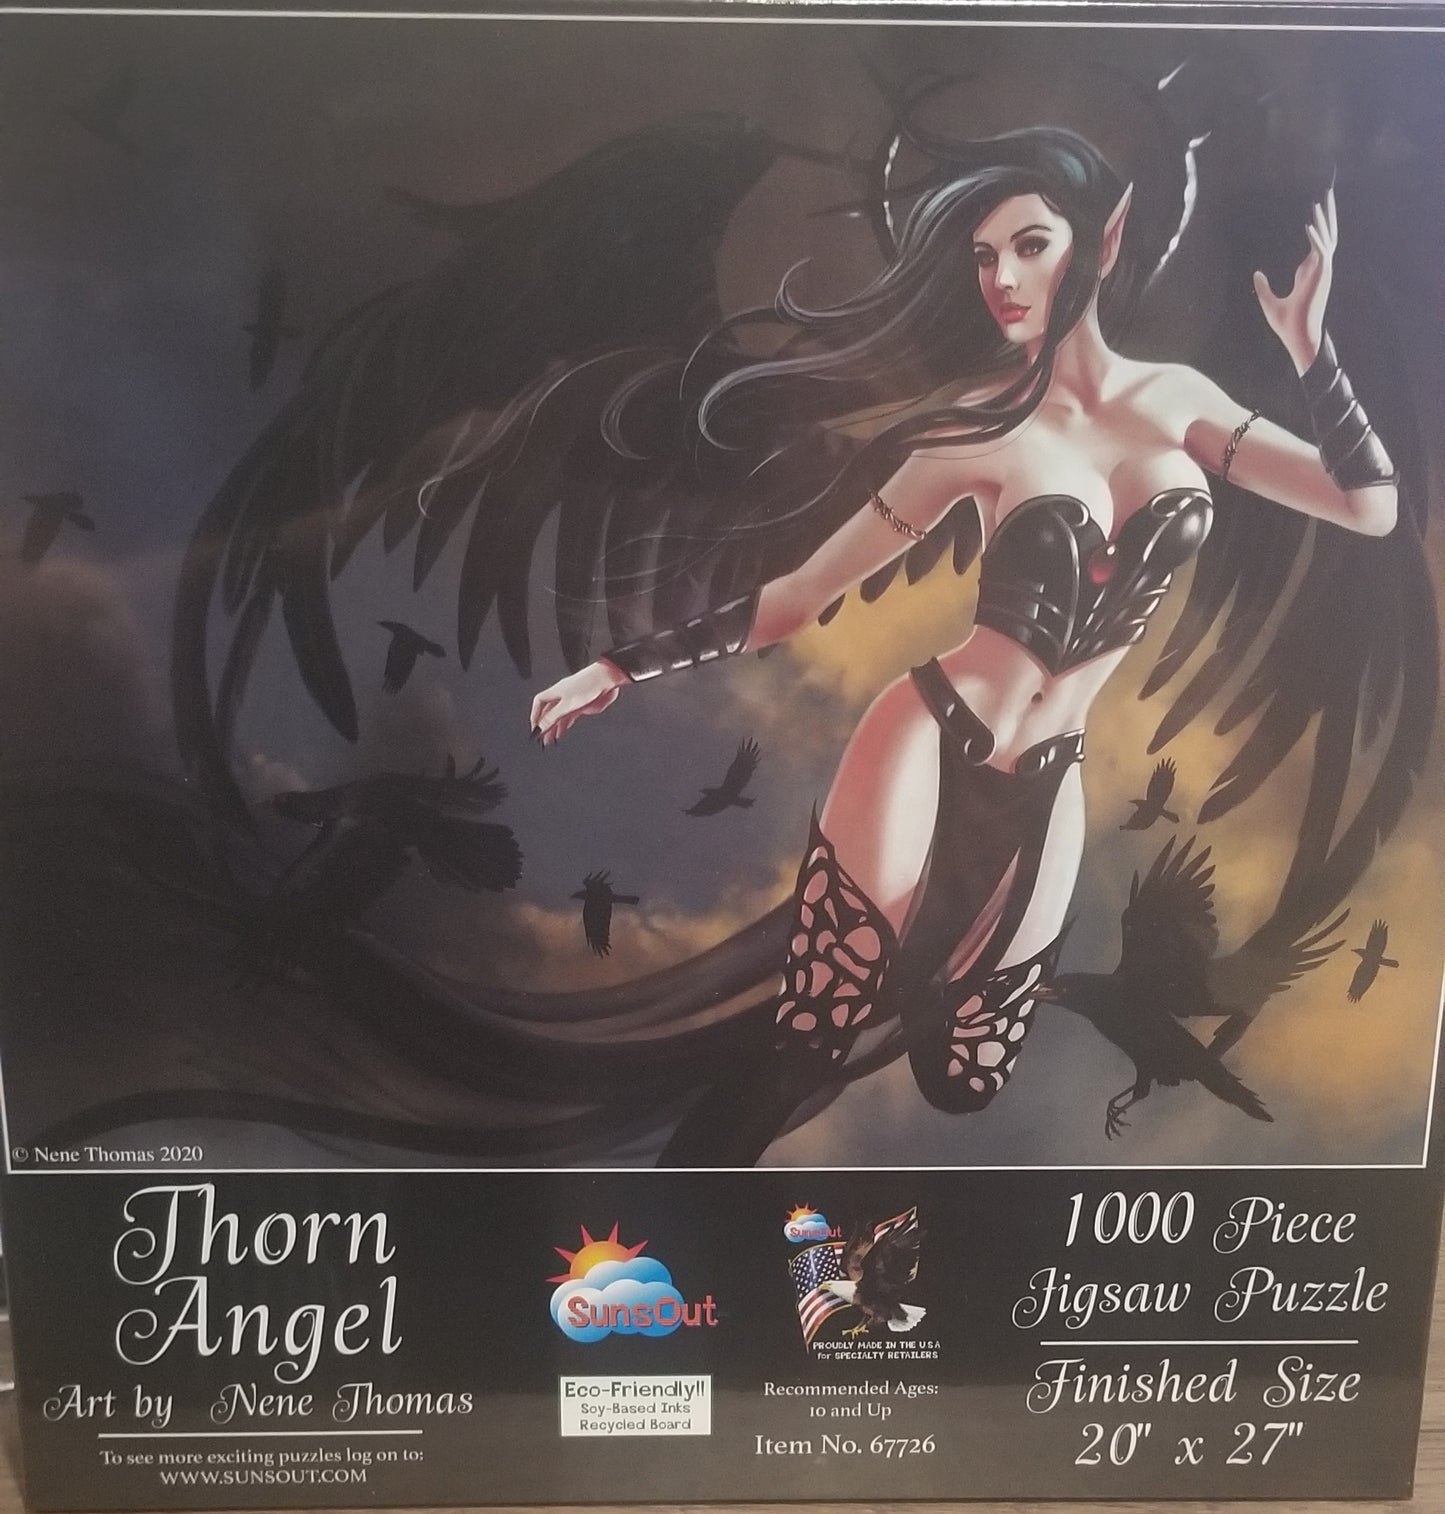 Thorn Angel by Nene Thomas, 1000 Piece Puzzle